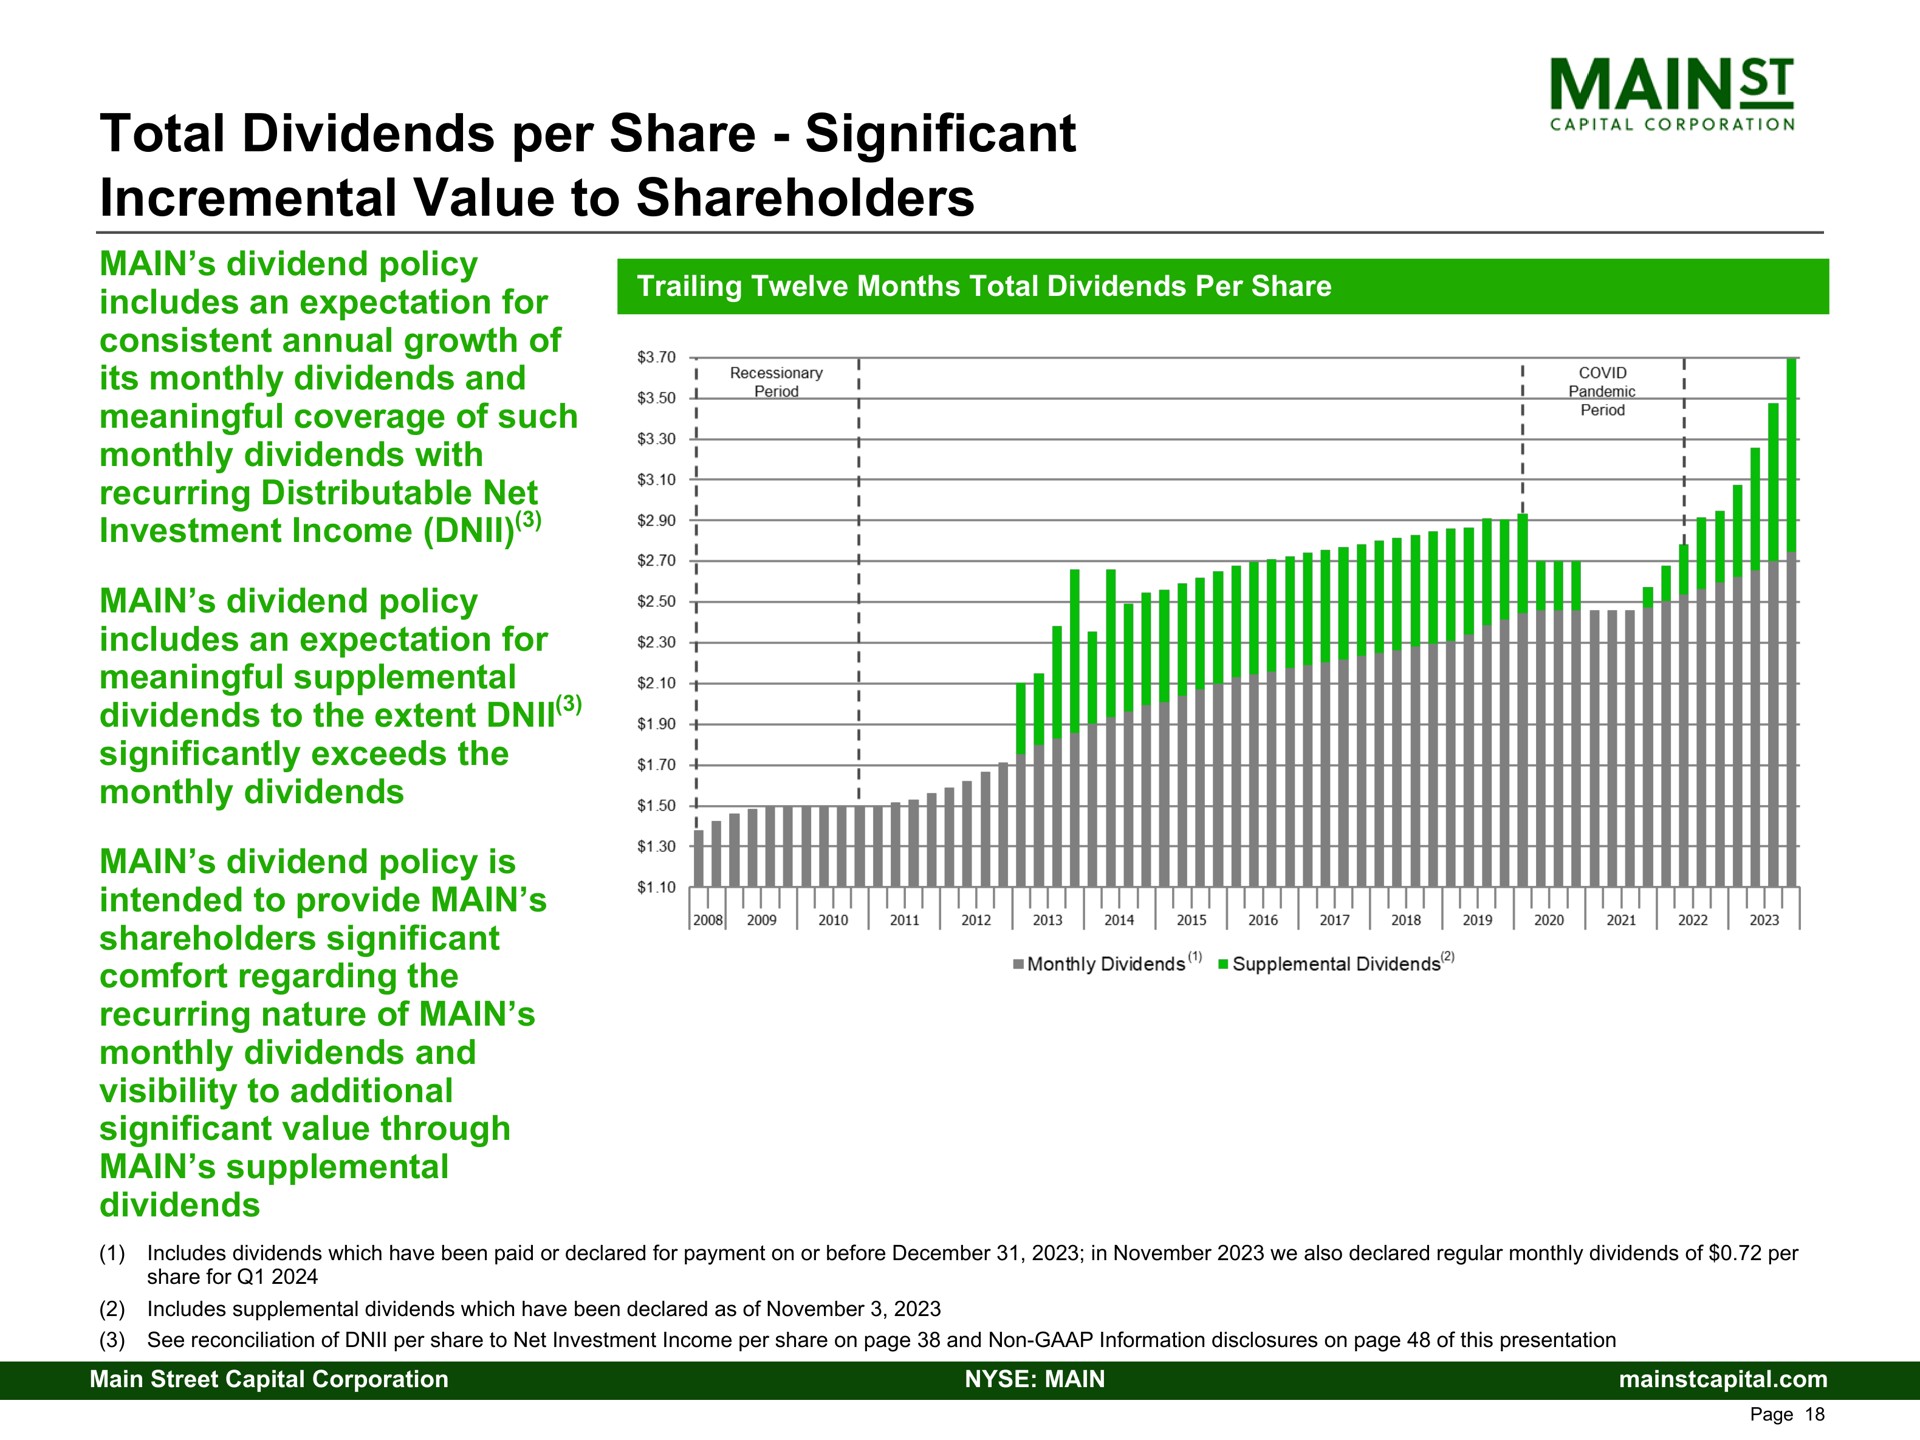 total dividends per share significant incremental value to shareholders recurring distributable net investment income the extent a main dividend policy is | Main Street Capital